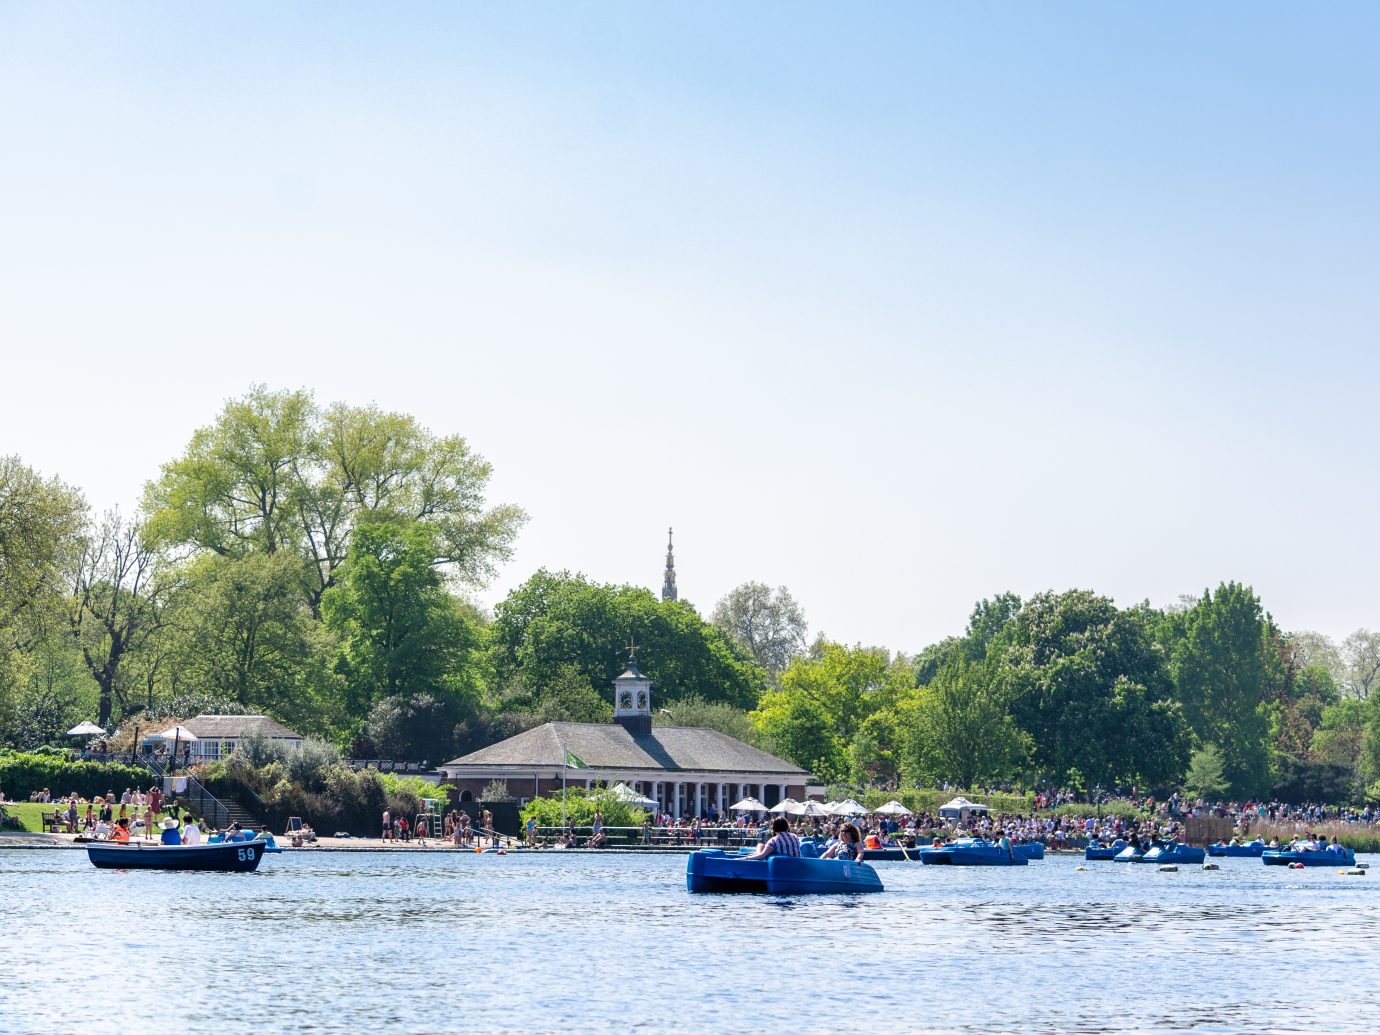 Weekend fun at the Serpentine lake in Hyde Park